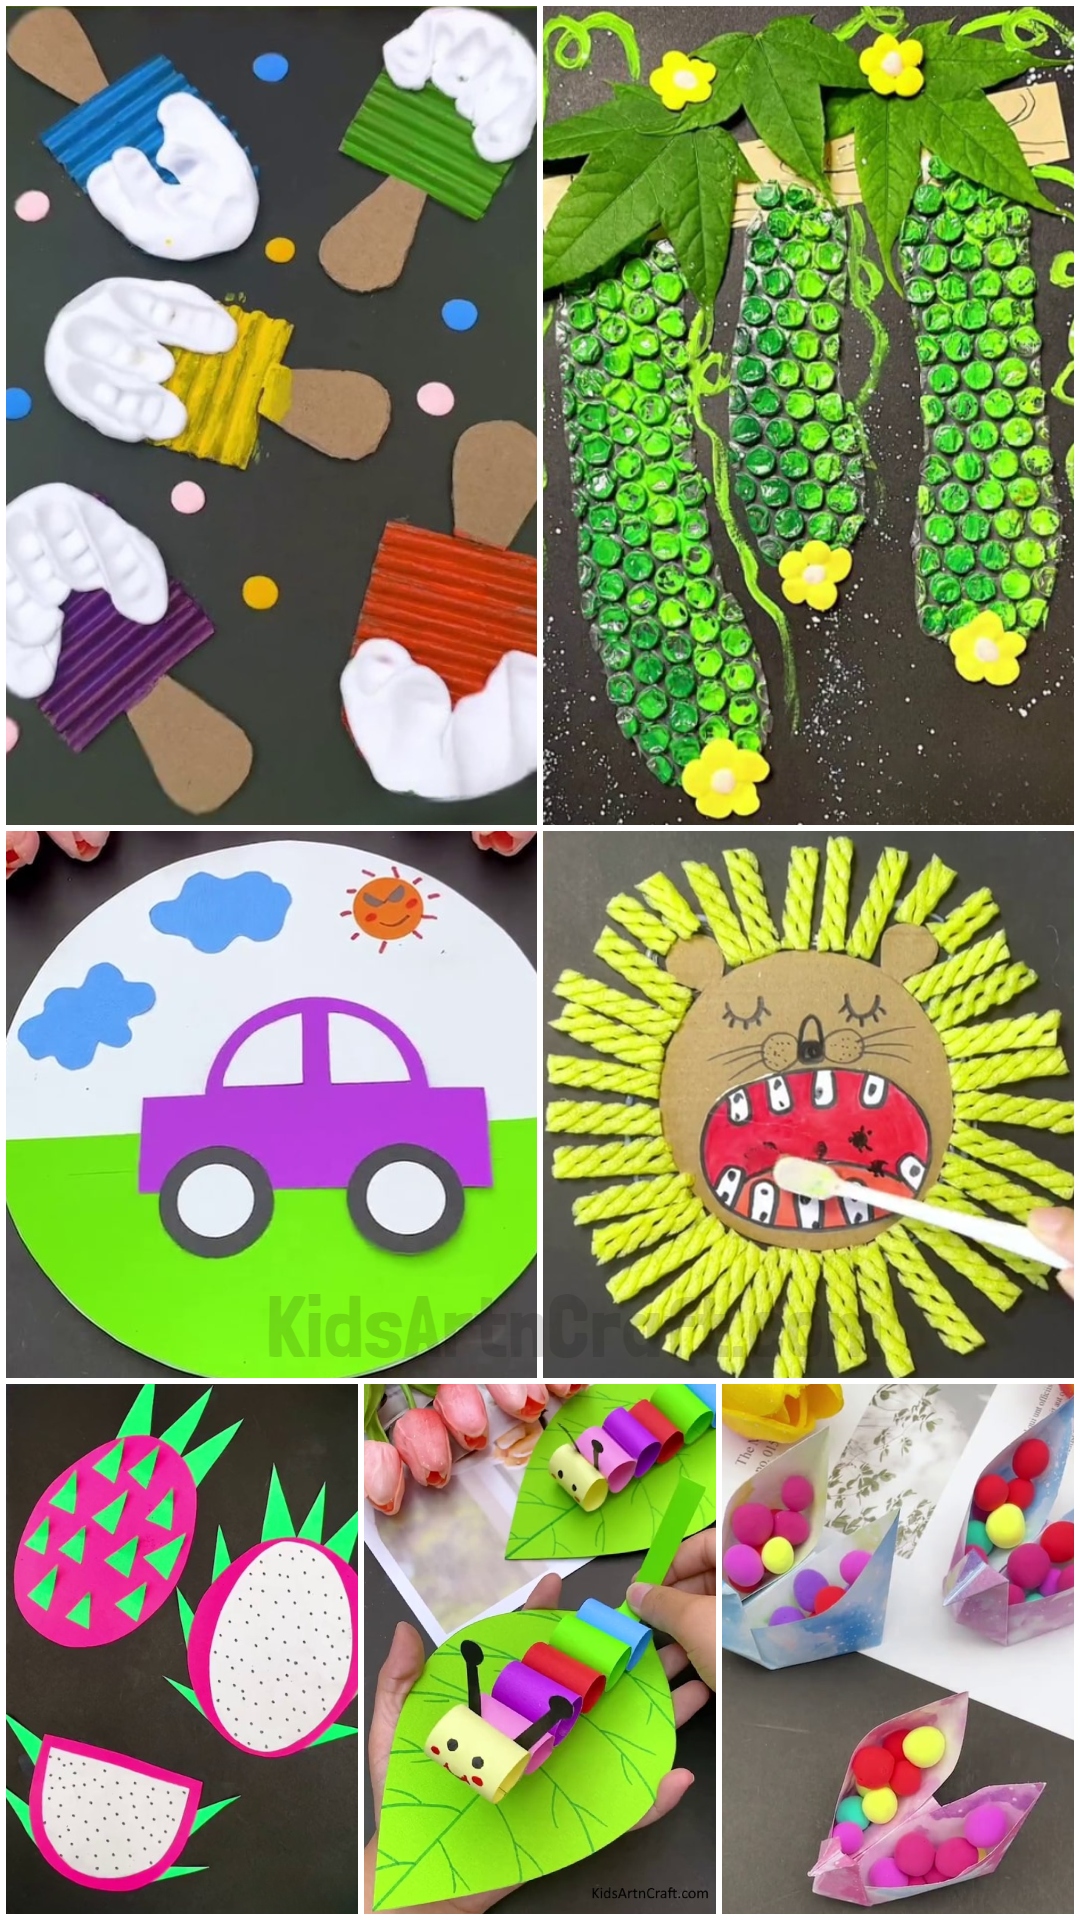 Fun and Fabulous Crafts: Let Your Imagination Soar